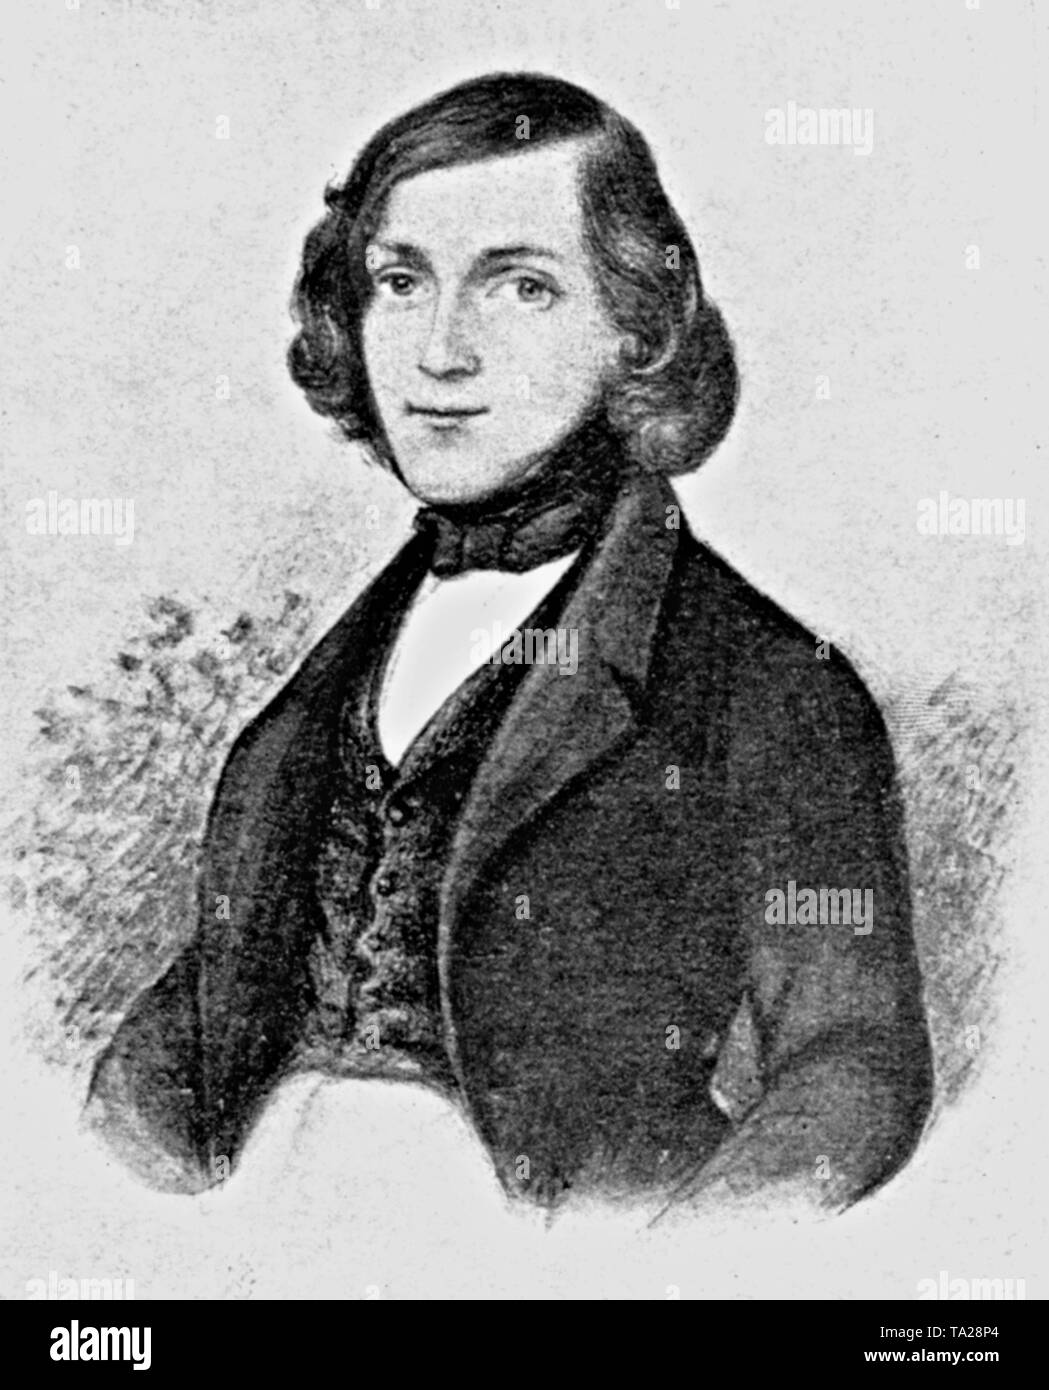 Theodor Fontane (1819-1898), a German poet. Youth portrait by David Ottensooser. Stock Photo